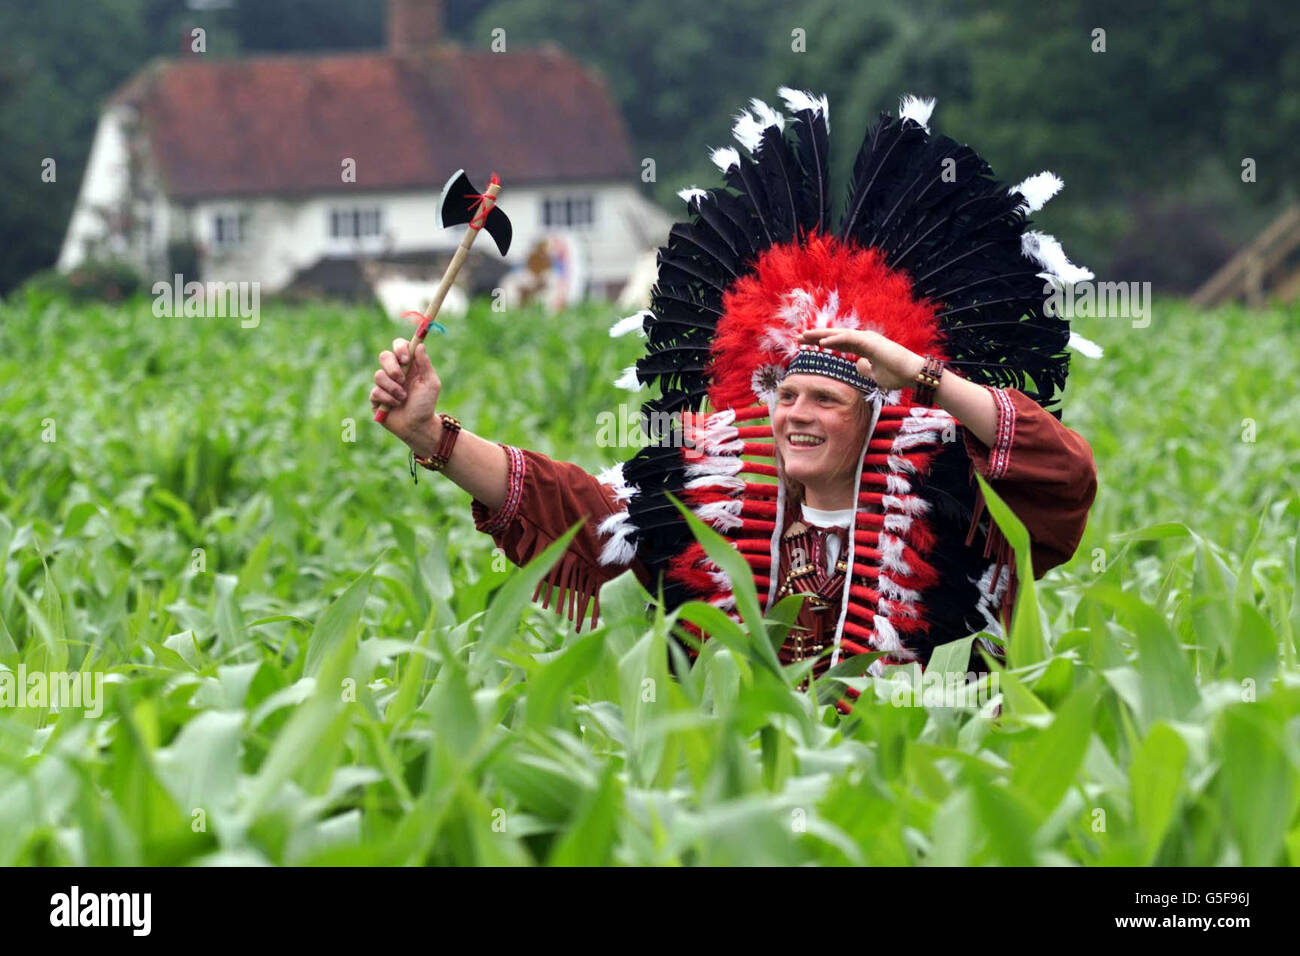 Member of staff Dan Small, dressed as a Red Indian, looks for a way out of the Wild West Maize Maze at Turners Hill, West Sussex. The farm maze is one of the largest ever created and depicts a cowboy on a rearing horse carved into an eight-acre field of cattle maize. Stock Photo